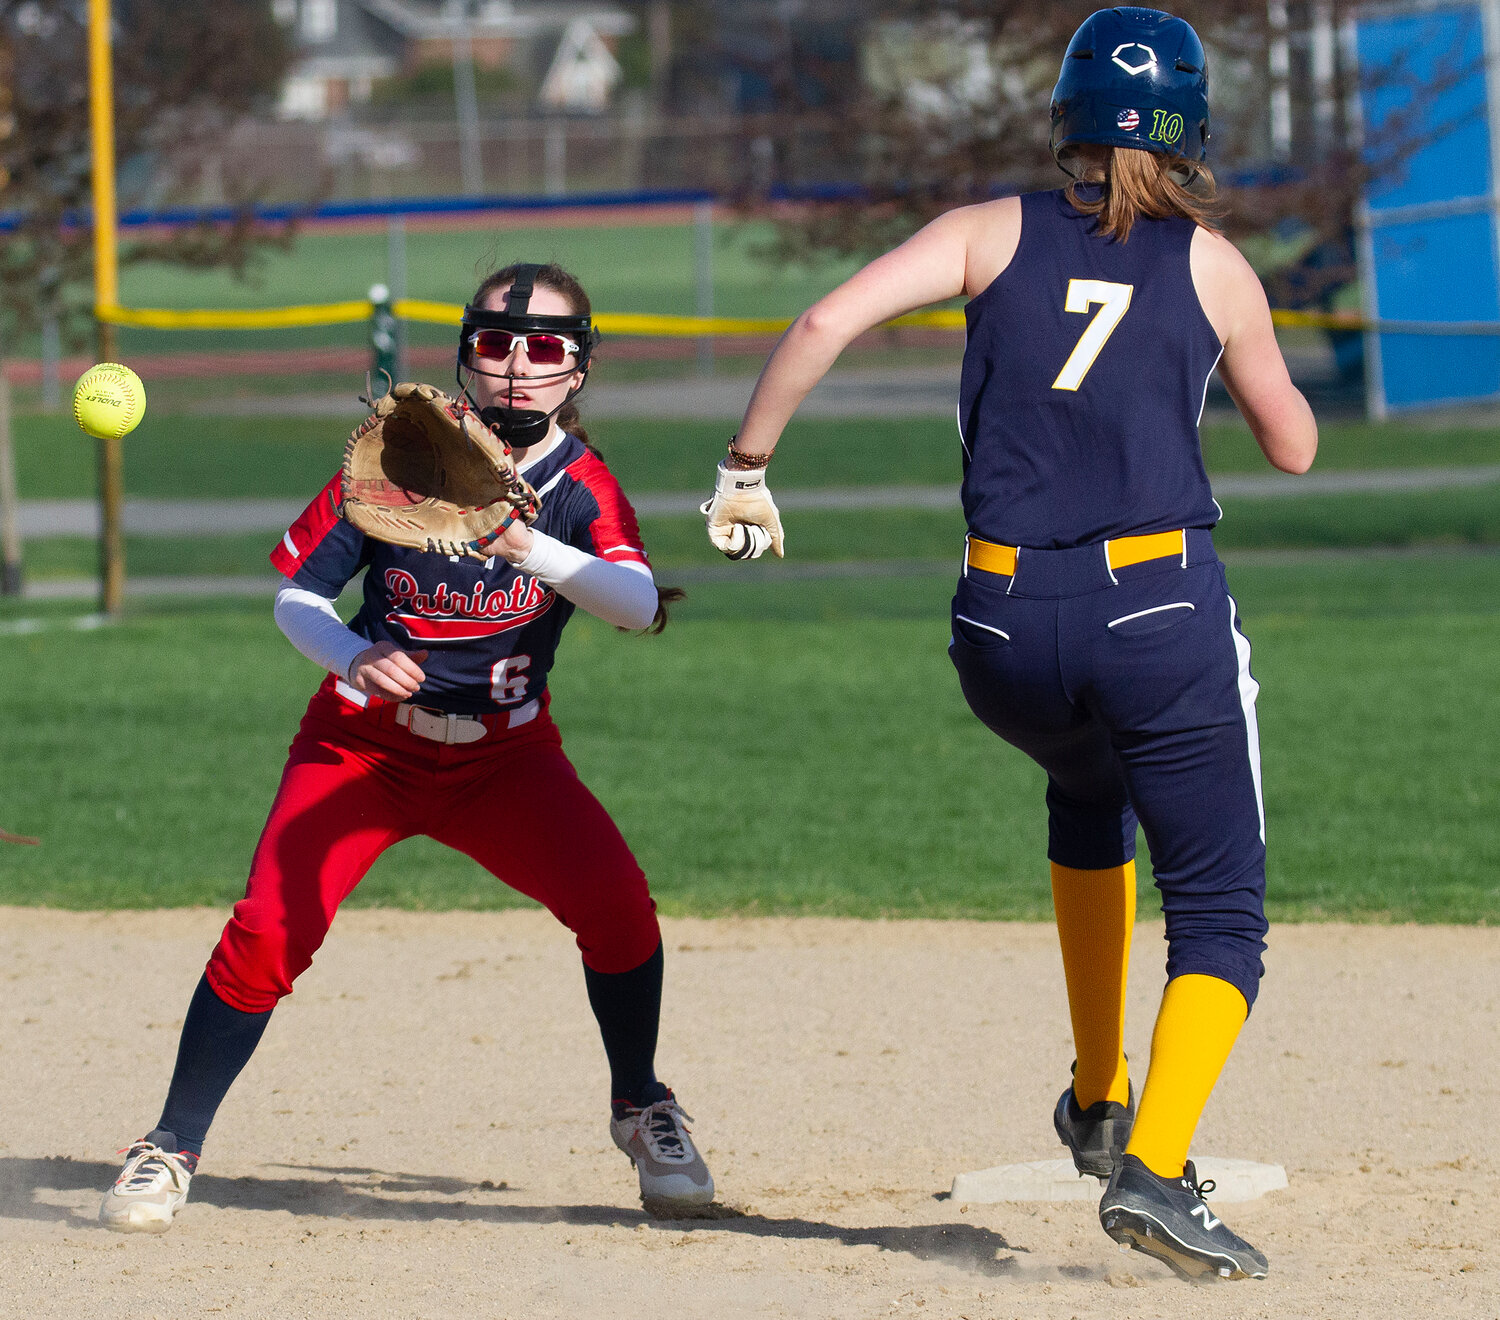 Portsmouth High shortstop Megan Malone takes a throw from first baseman Kaelyn Mahoney on a grounder to first to force out a Barrington baserunner last Thursday, April 20.